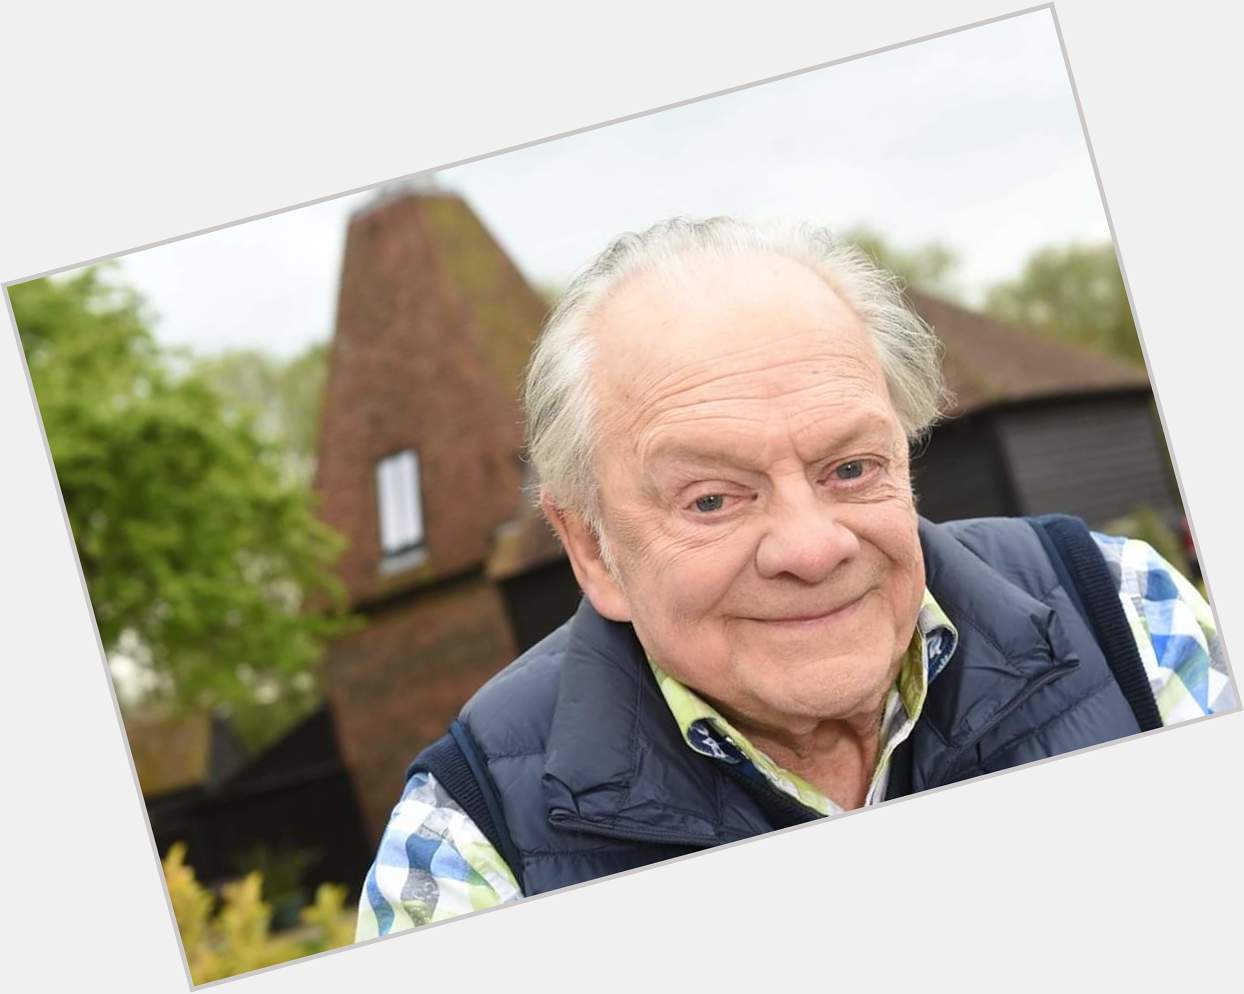 Happy Birthday Sir David Jason who is 80 years old today. 